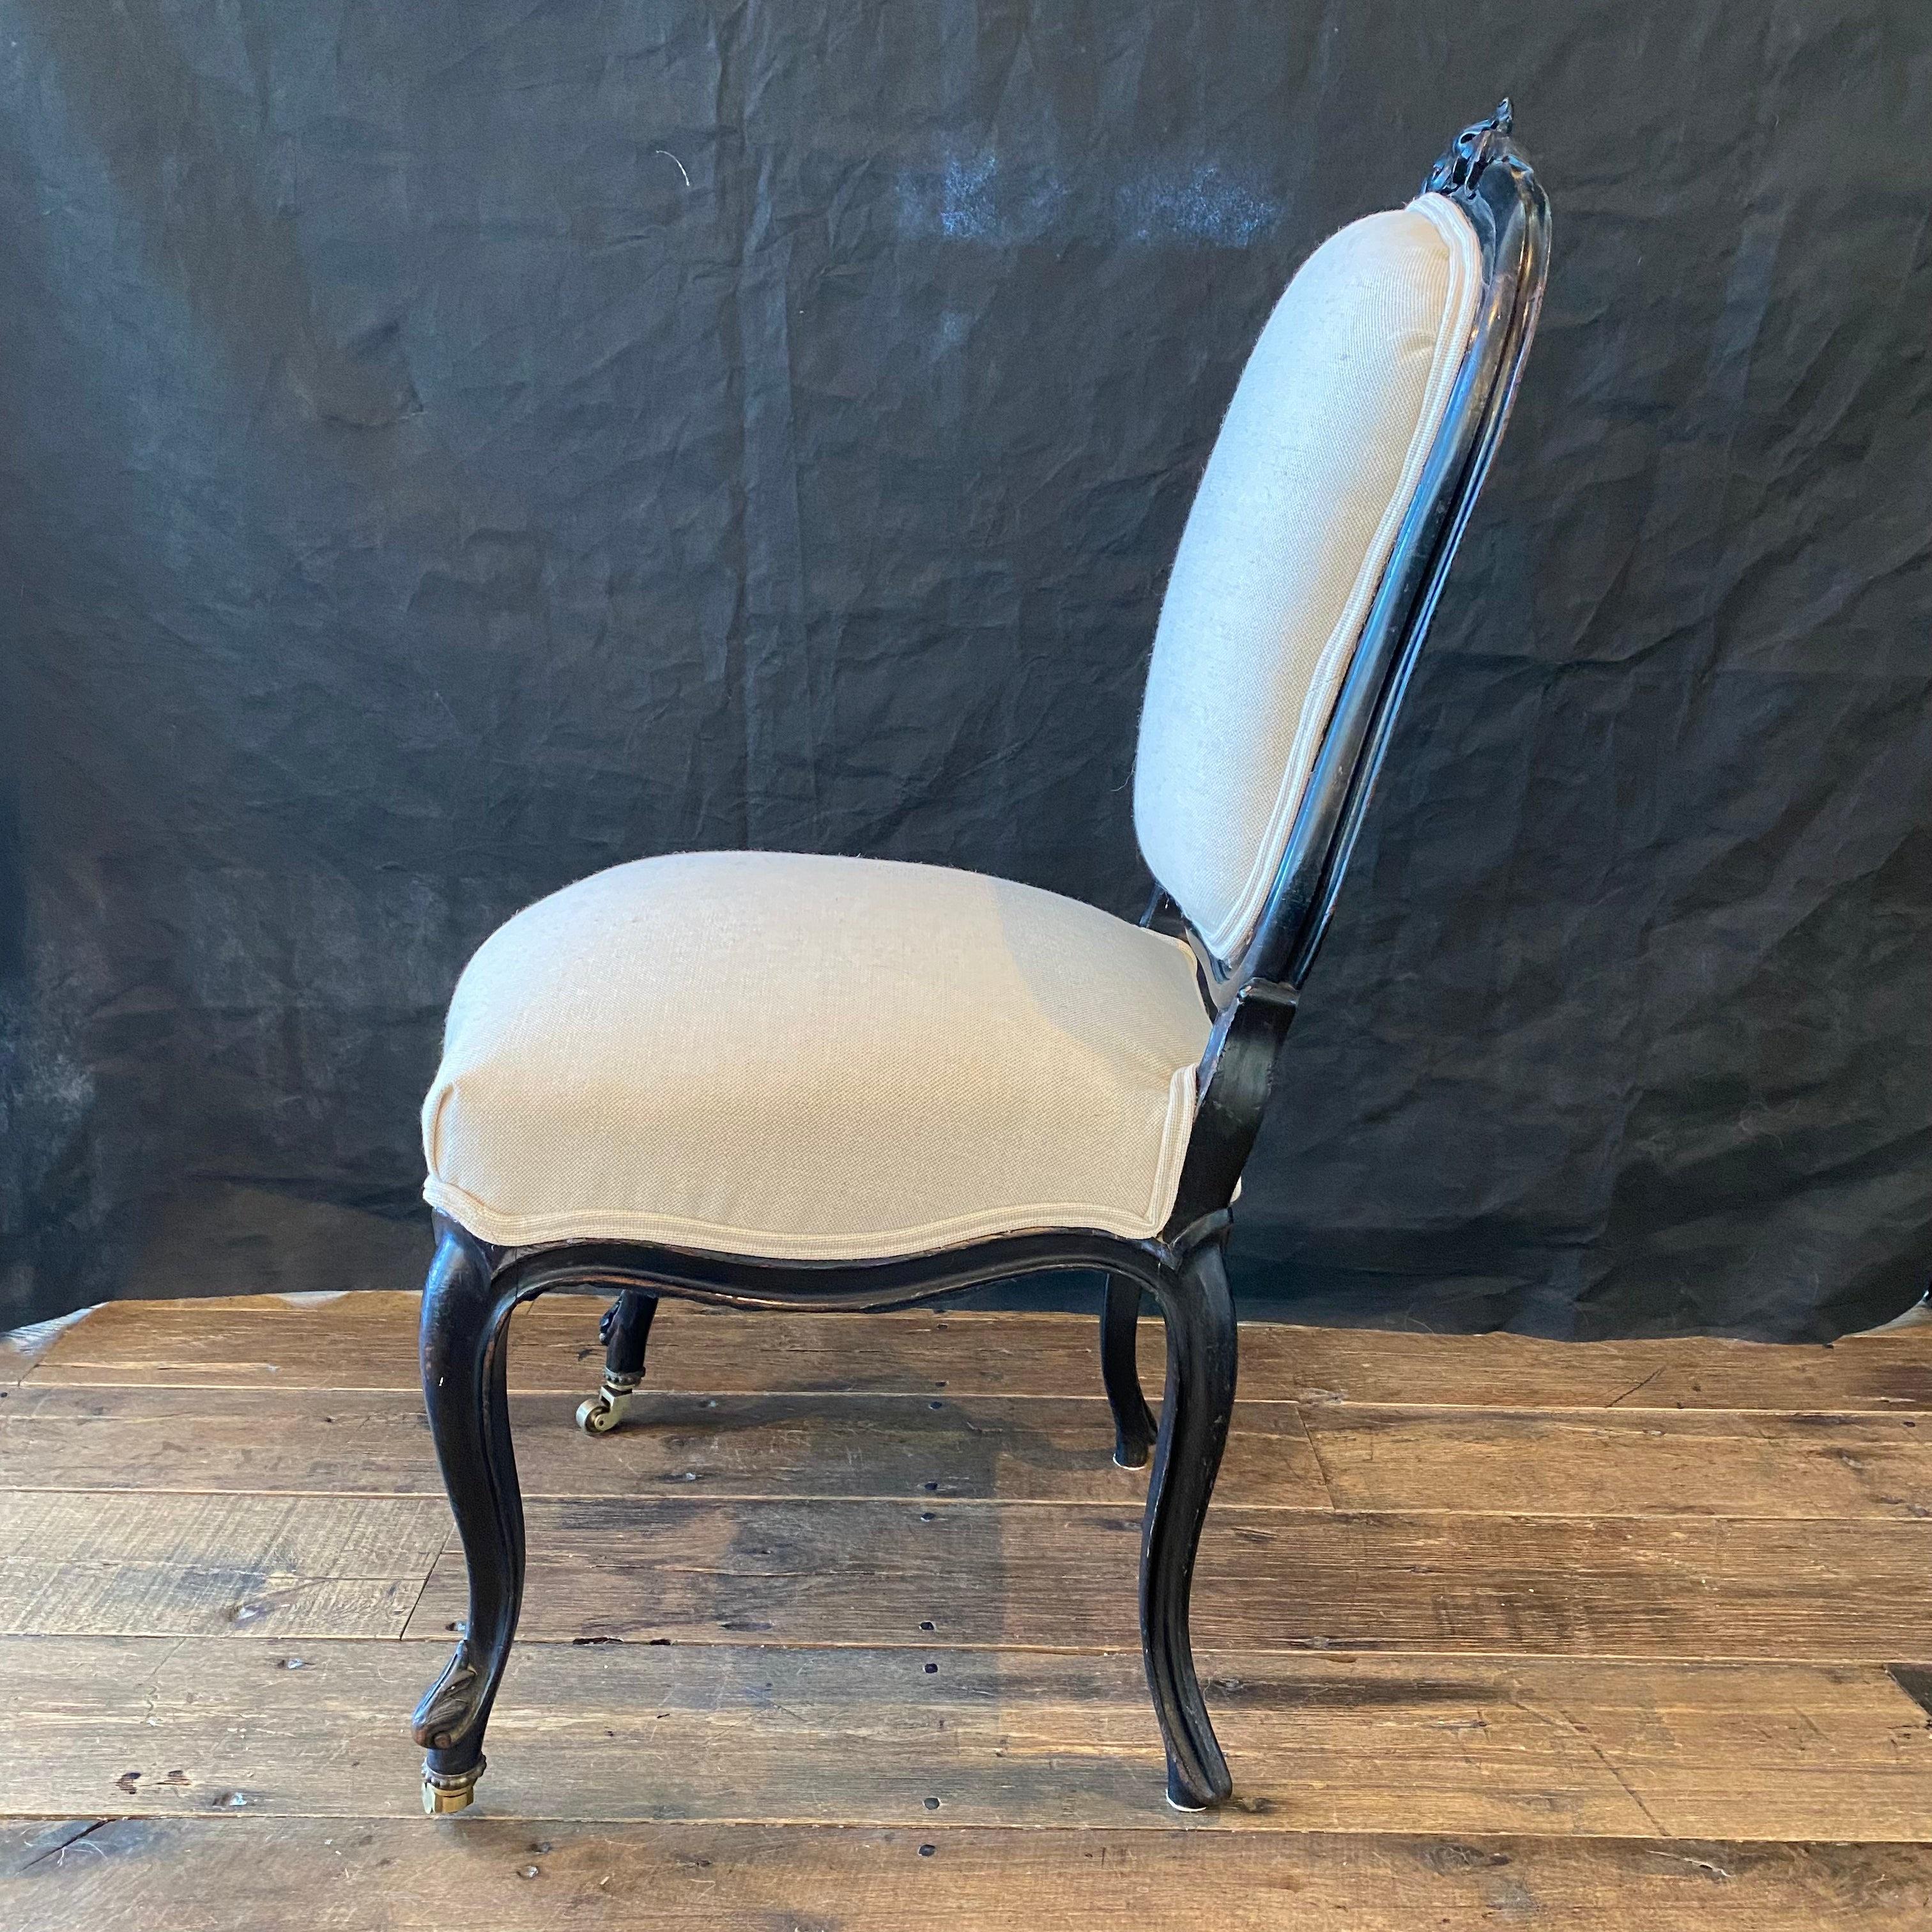 Exquisite French 19th Century Ebonized Napoleon III Side or Parlor Chair In Good Condition For Sale In Hopewell, NJ